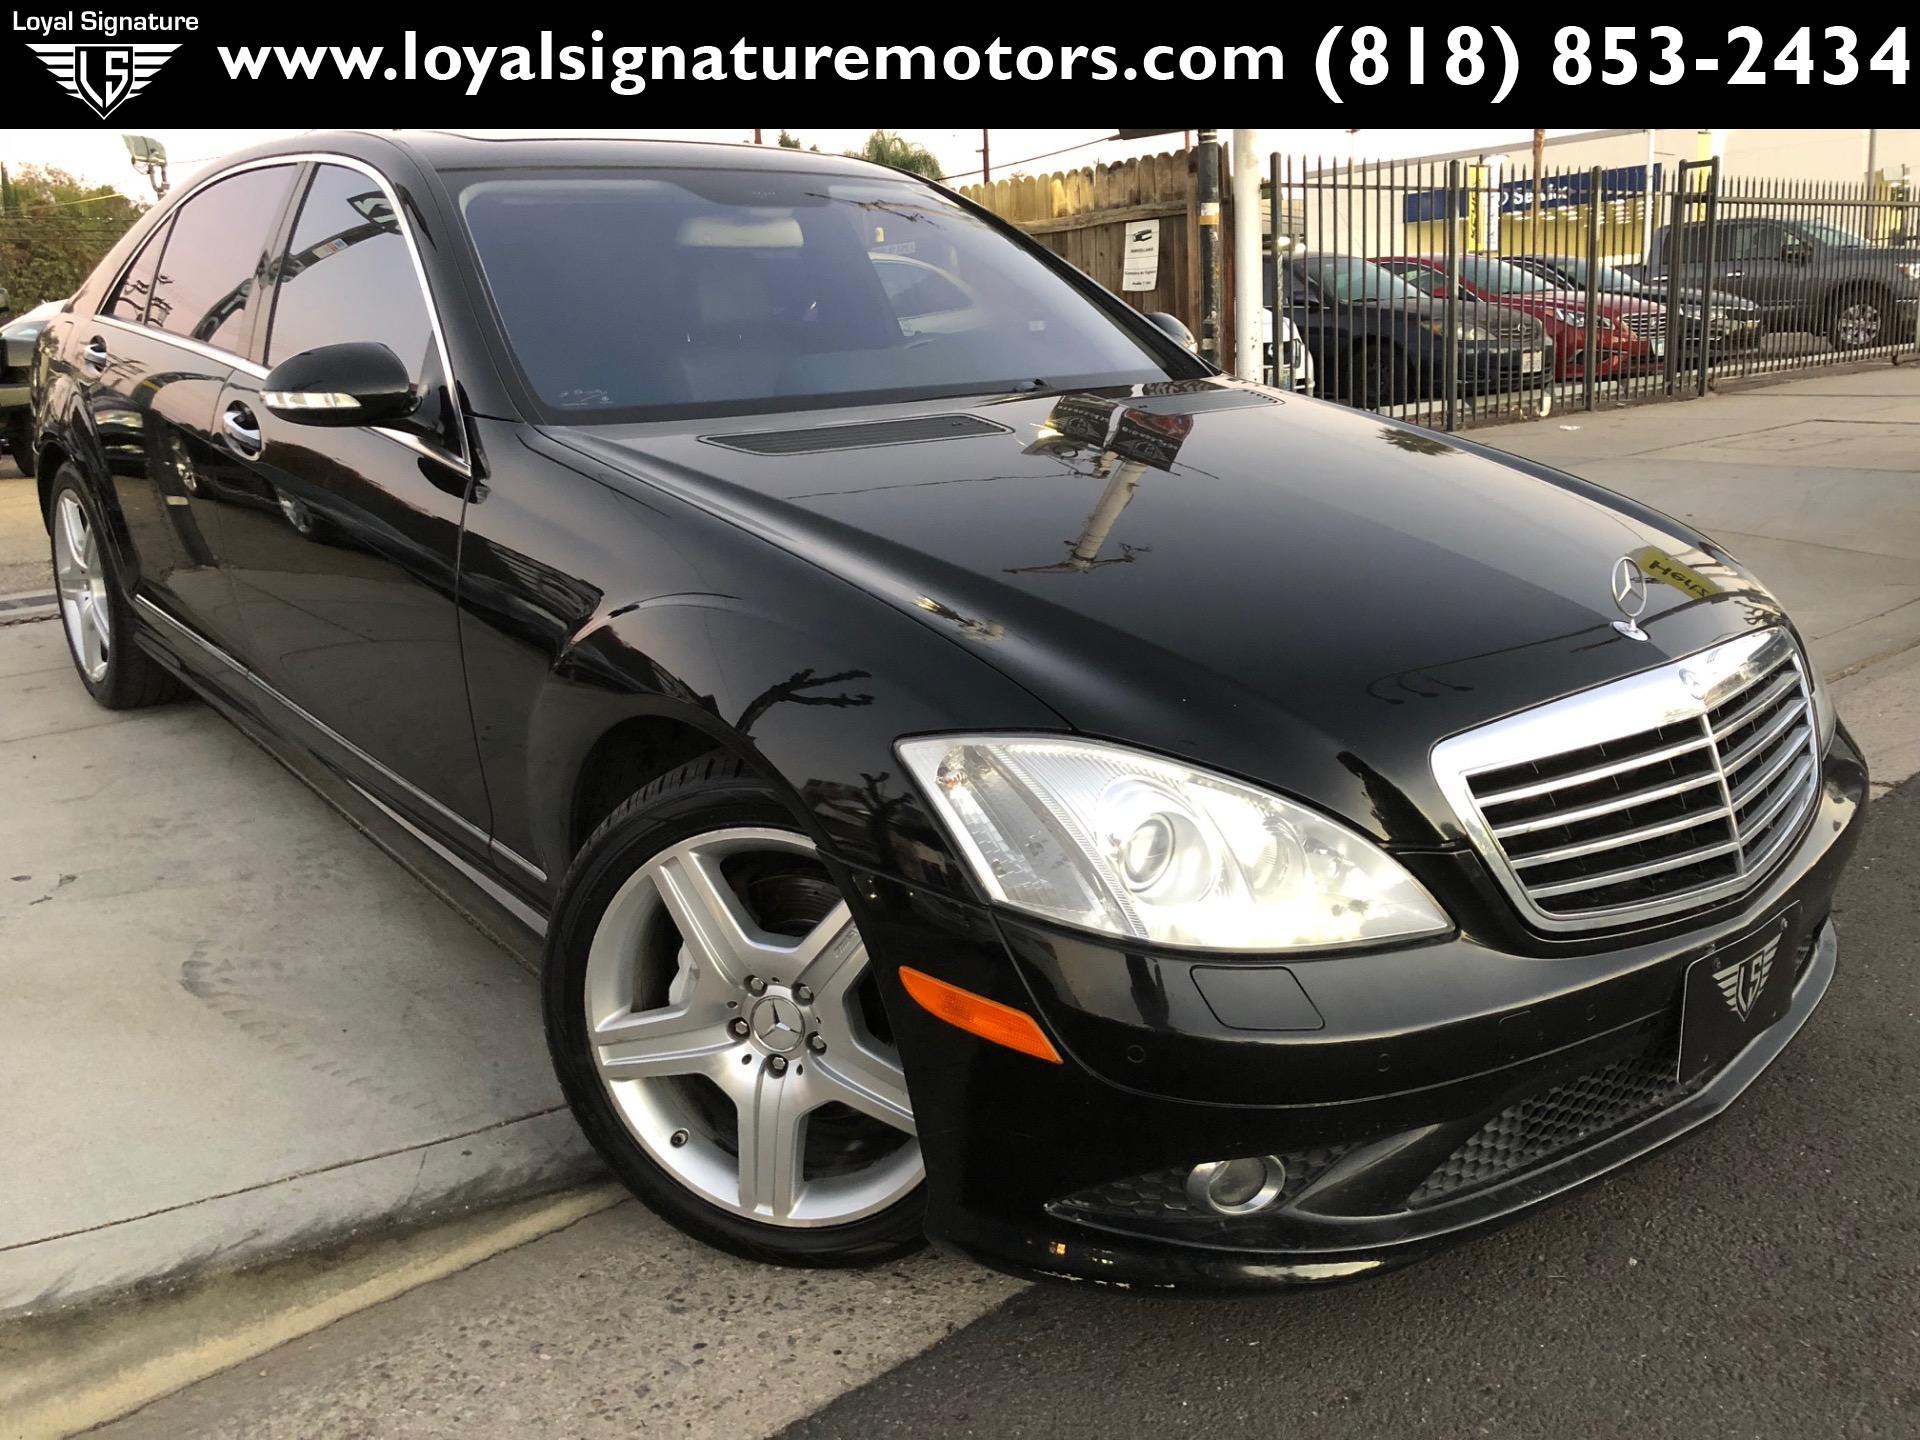 Used 2009 Mercedes Benz S Class S 550 For Sale 11 995 Loyal Signature Motors Inc Stock 2018137